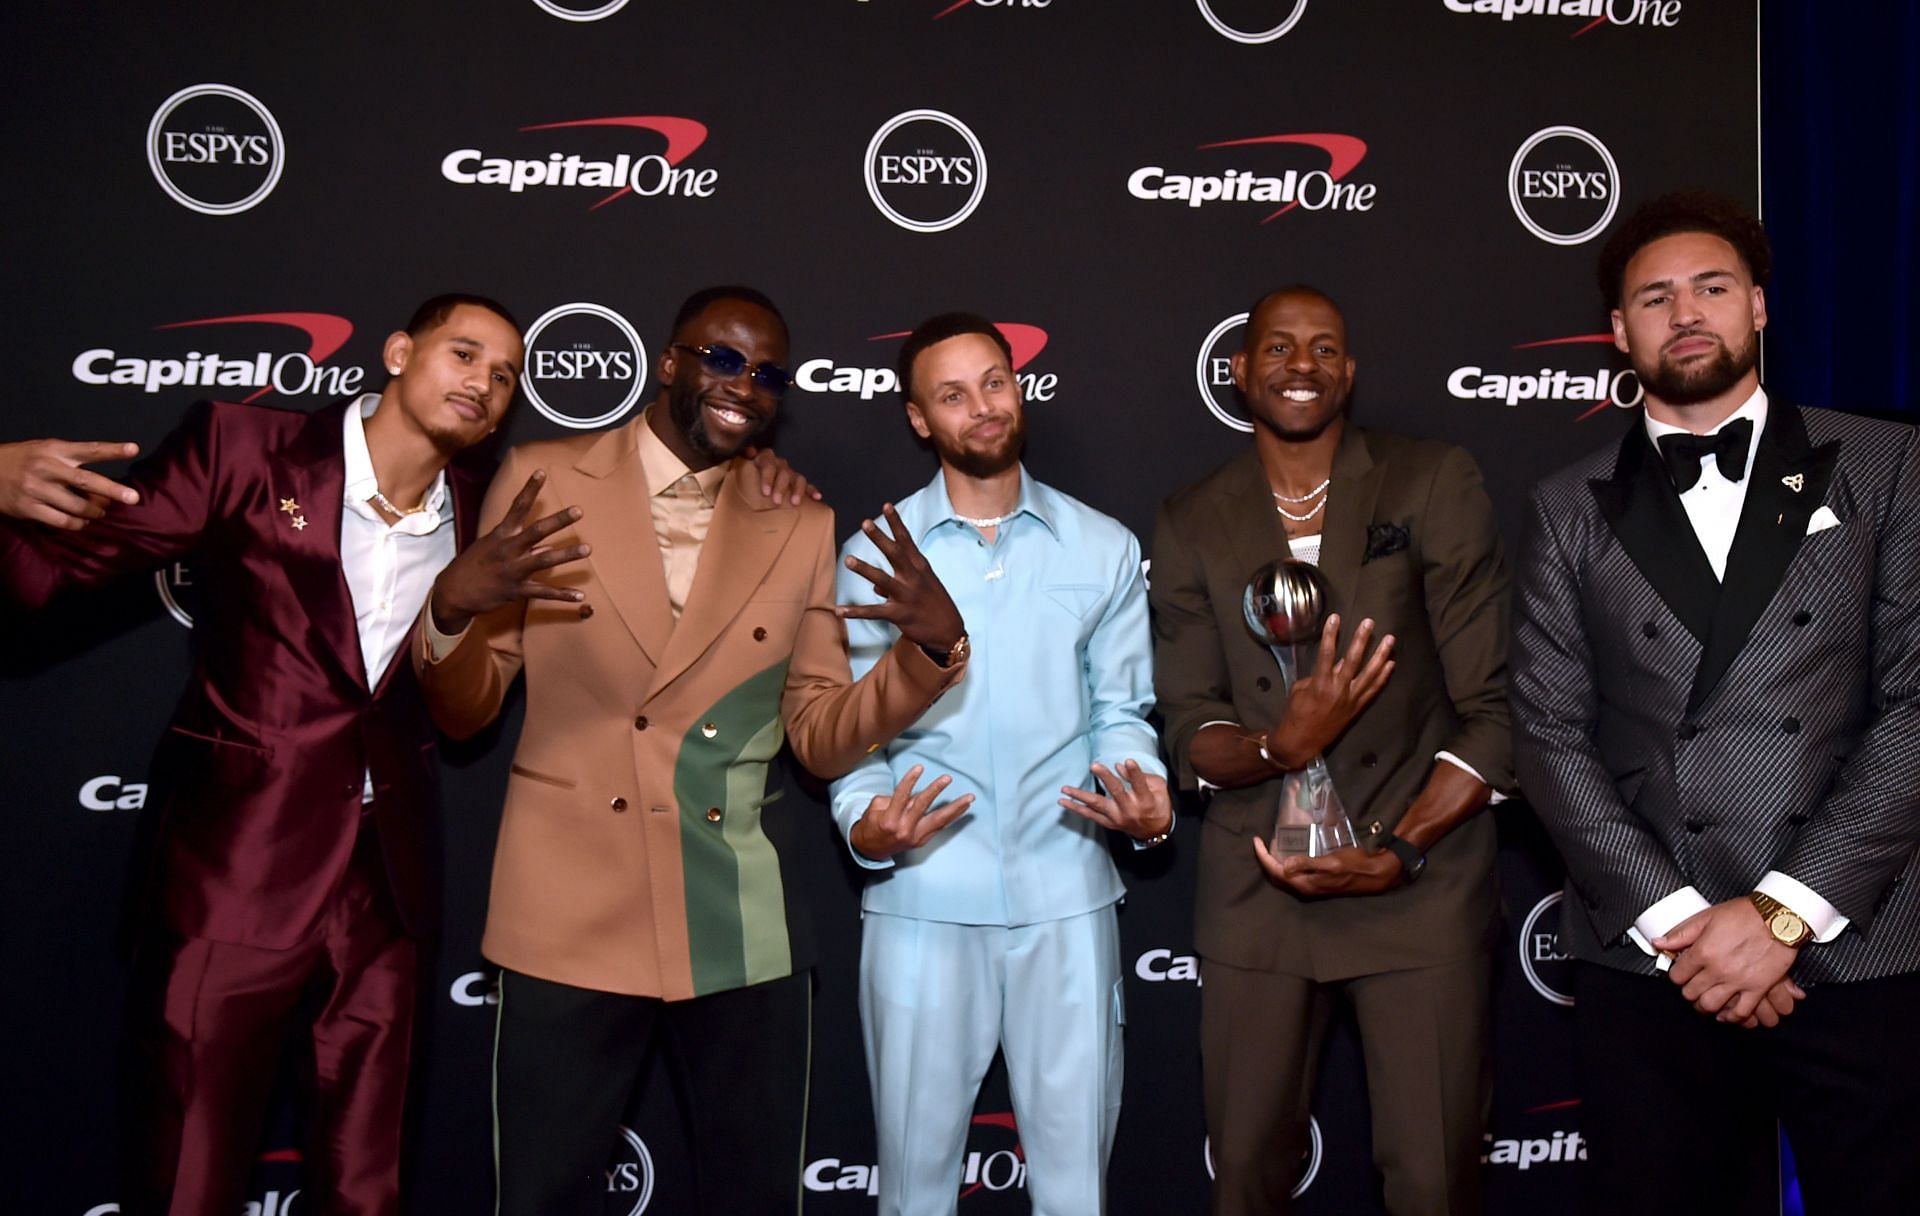 (L-R) Juan Toscano-Anderson, Draymond Green, Stephen Curry, Andre Iguodala, and Klay Thompson of the Golden State Warriors at the 2022 ESPYs